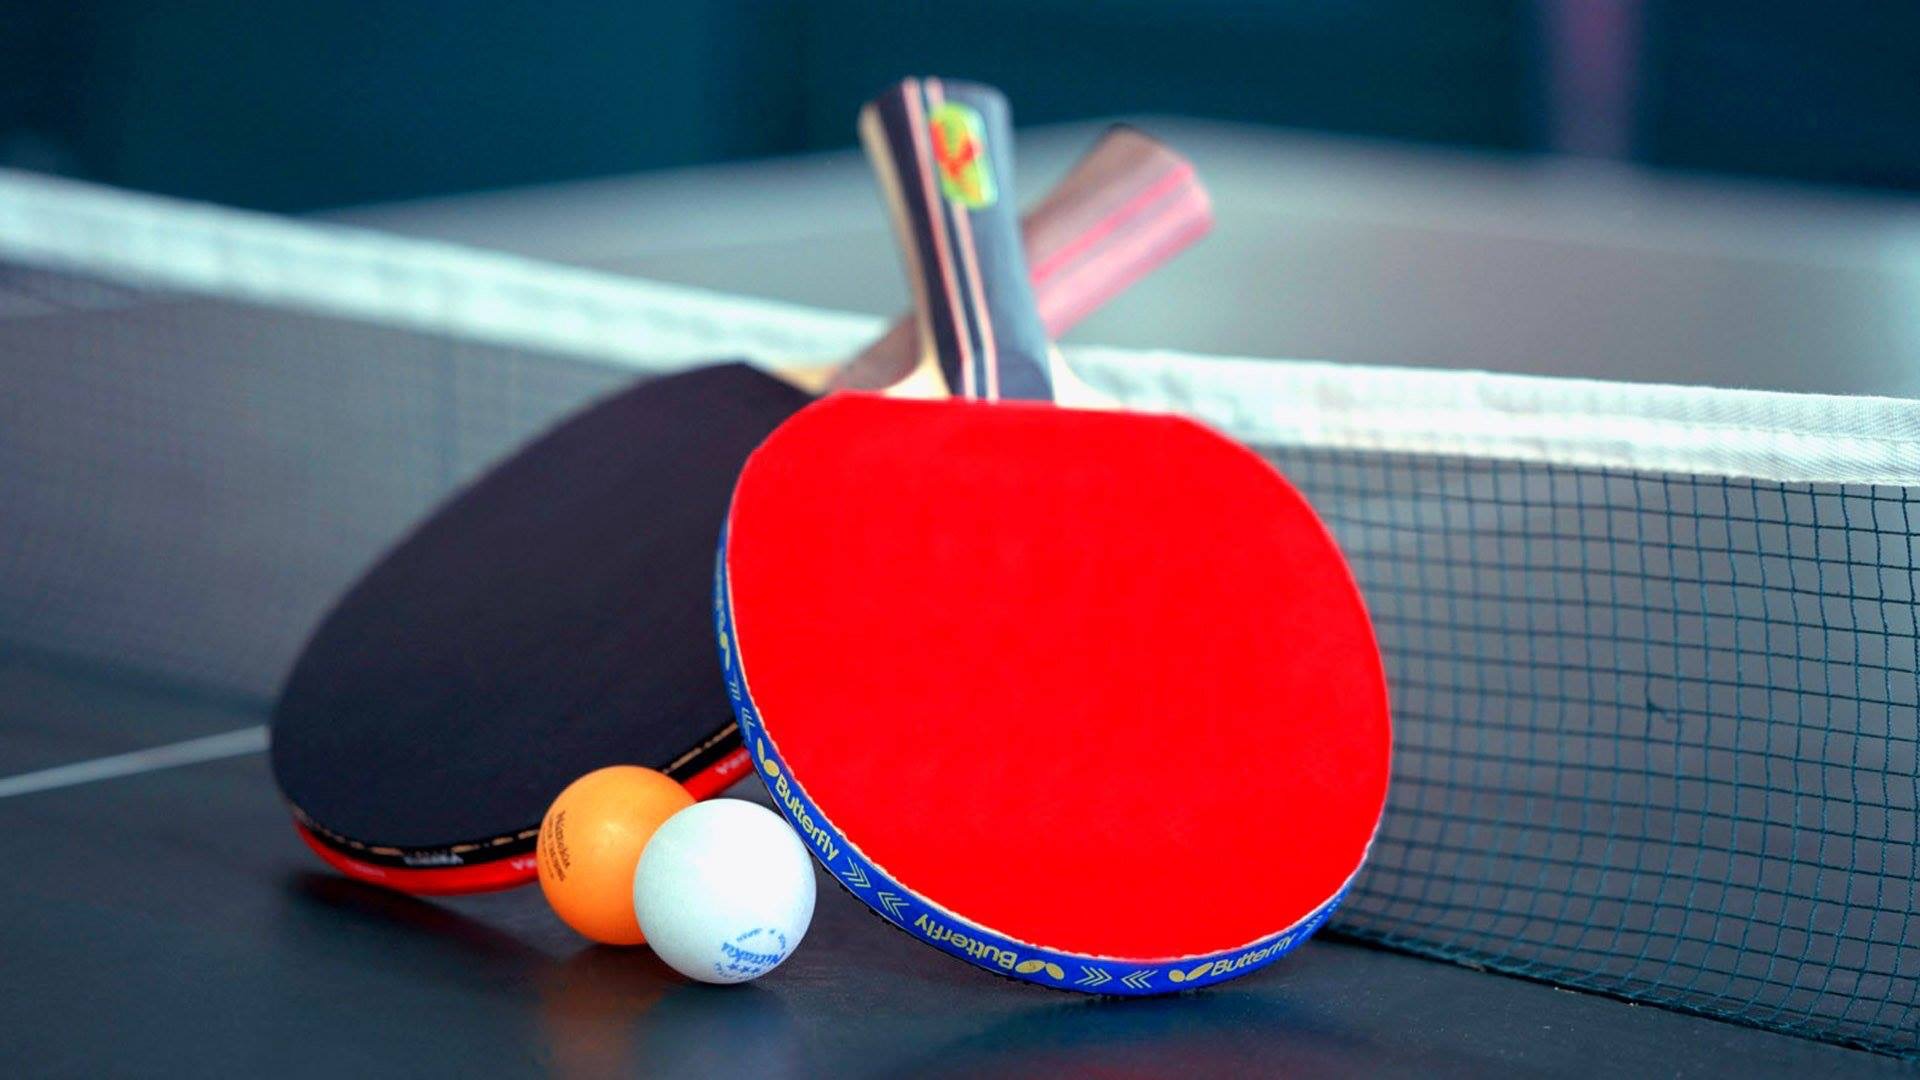 List Of Top Most Popular Table Tennis Domestic Tournaments In